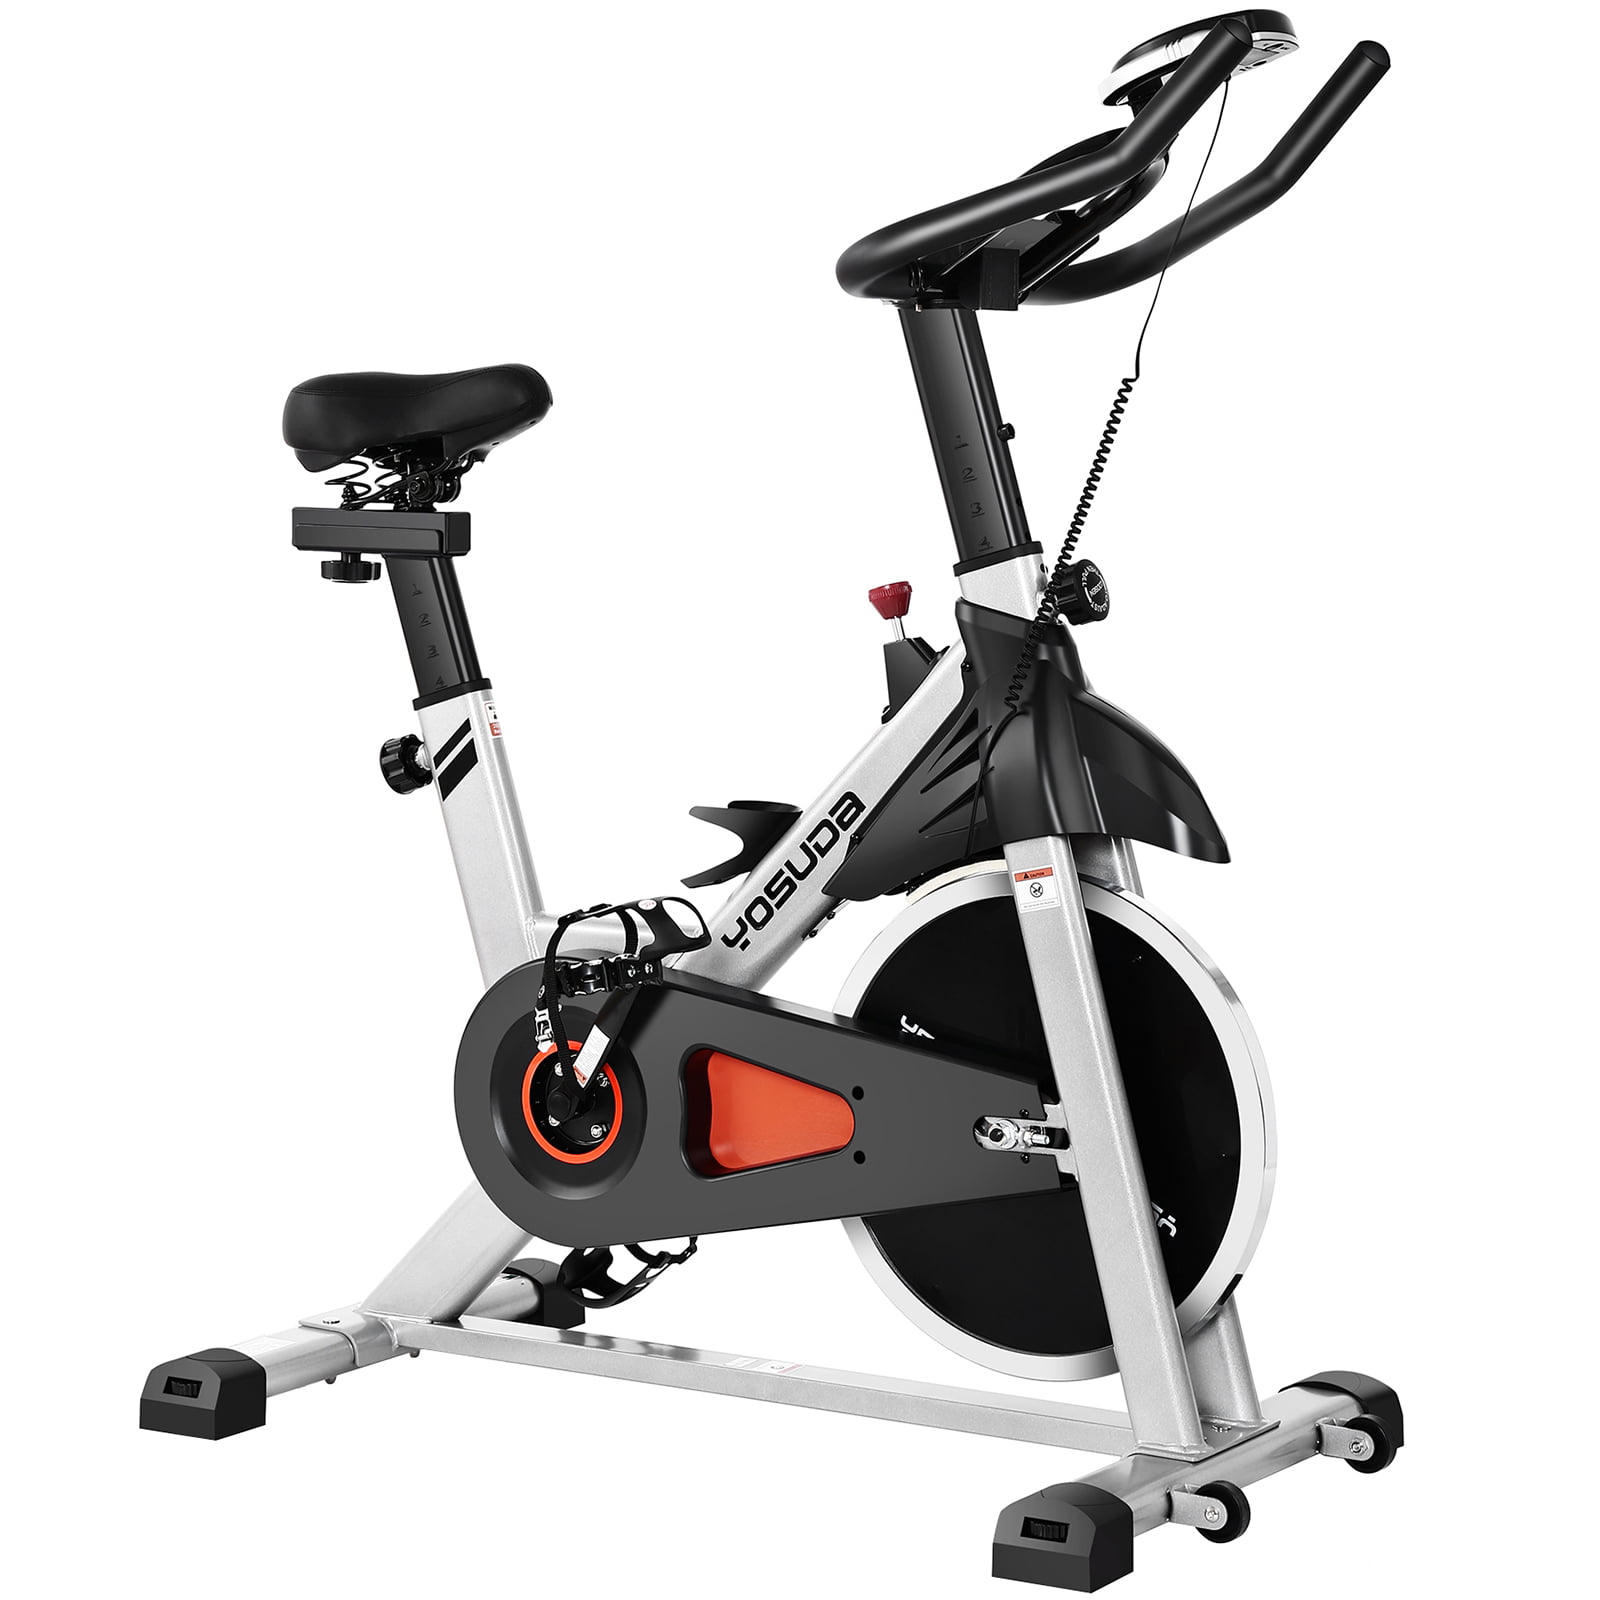 Indoor Sport Bike Stationary Exercise Cycling Bicycle For Home Cardio Workout US 